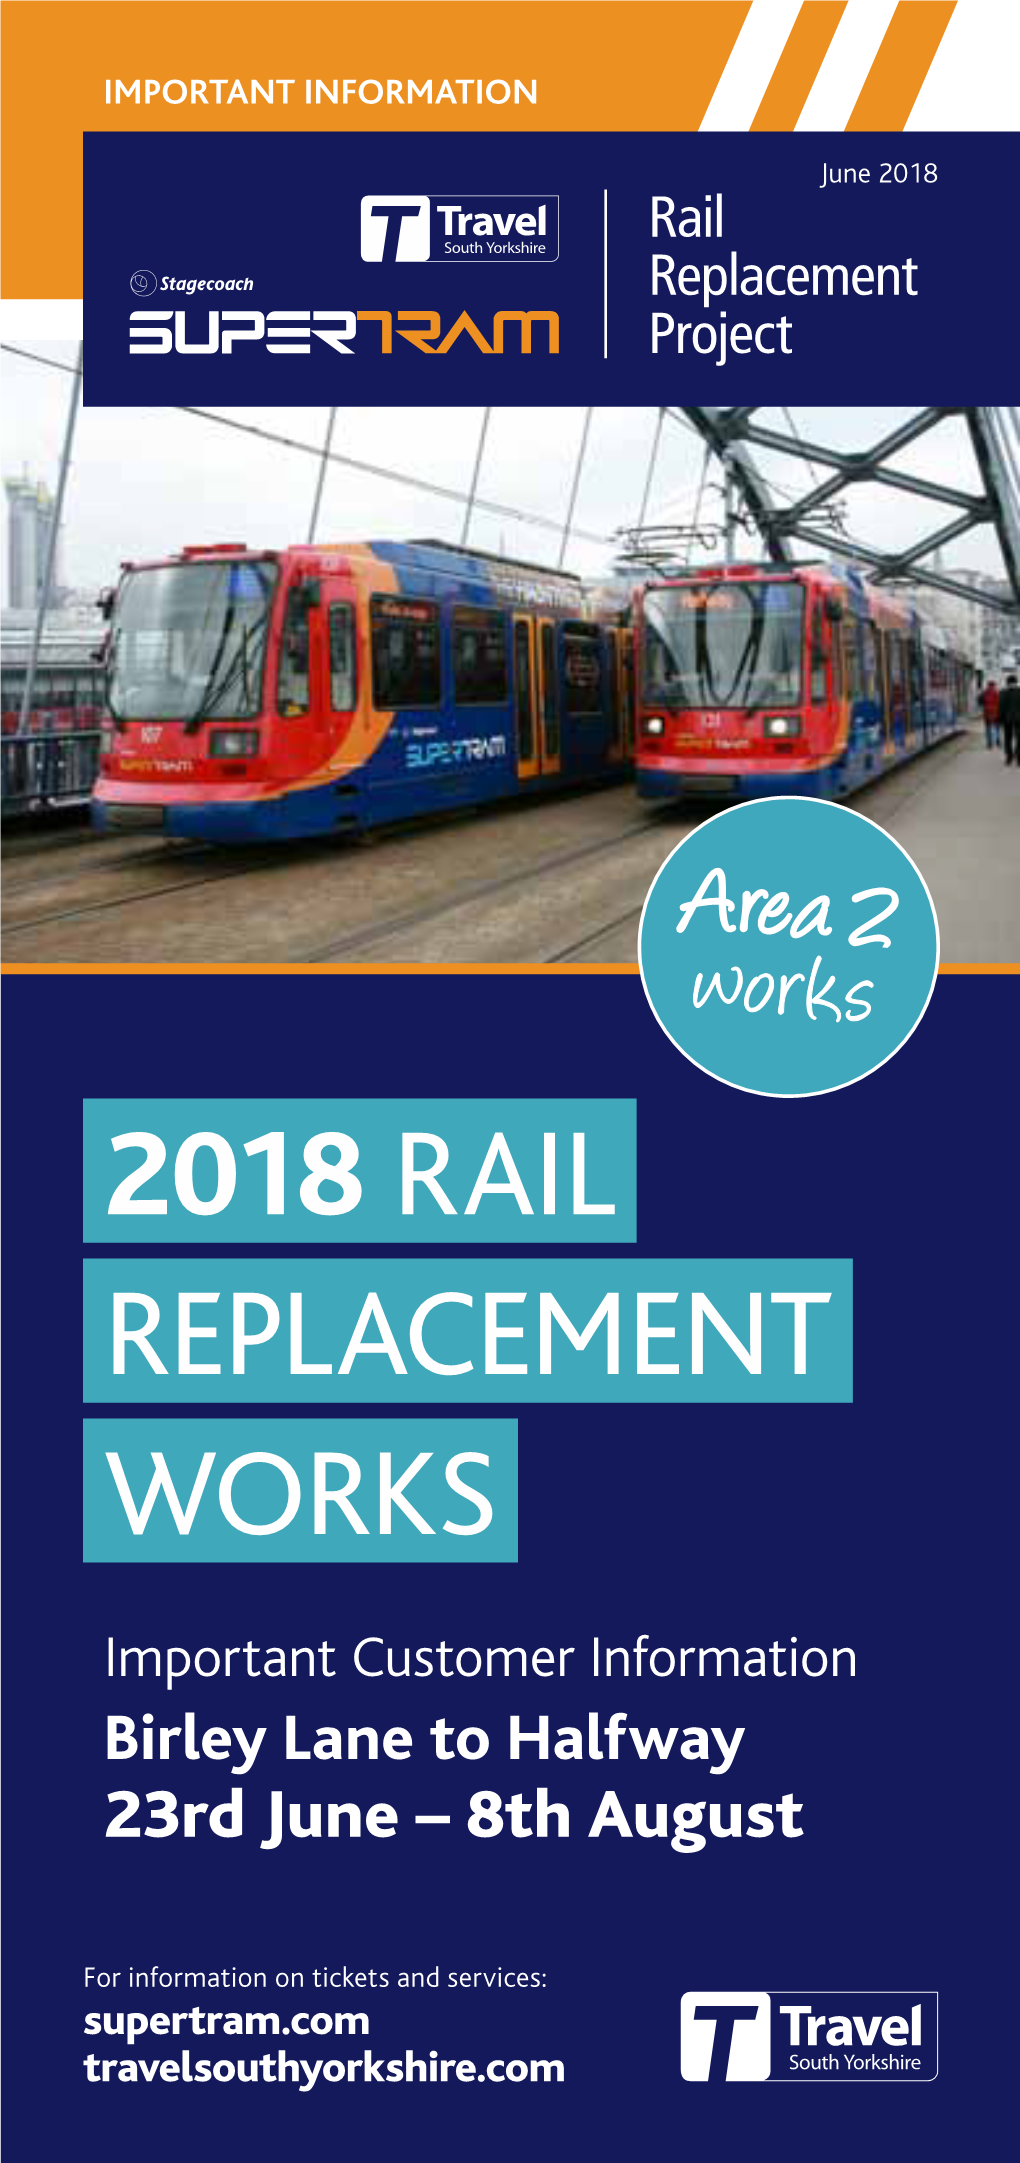 Works Replacement 2018 Rail